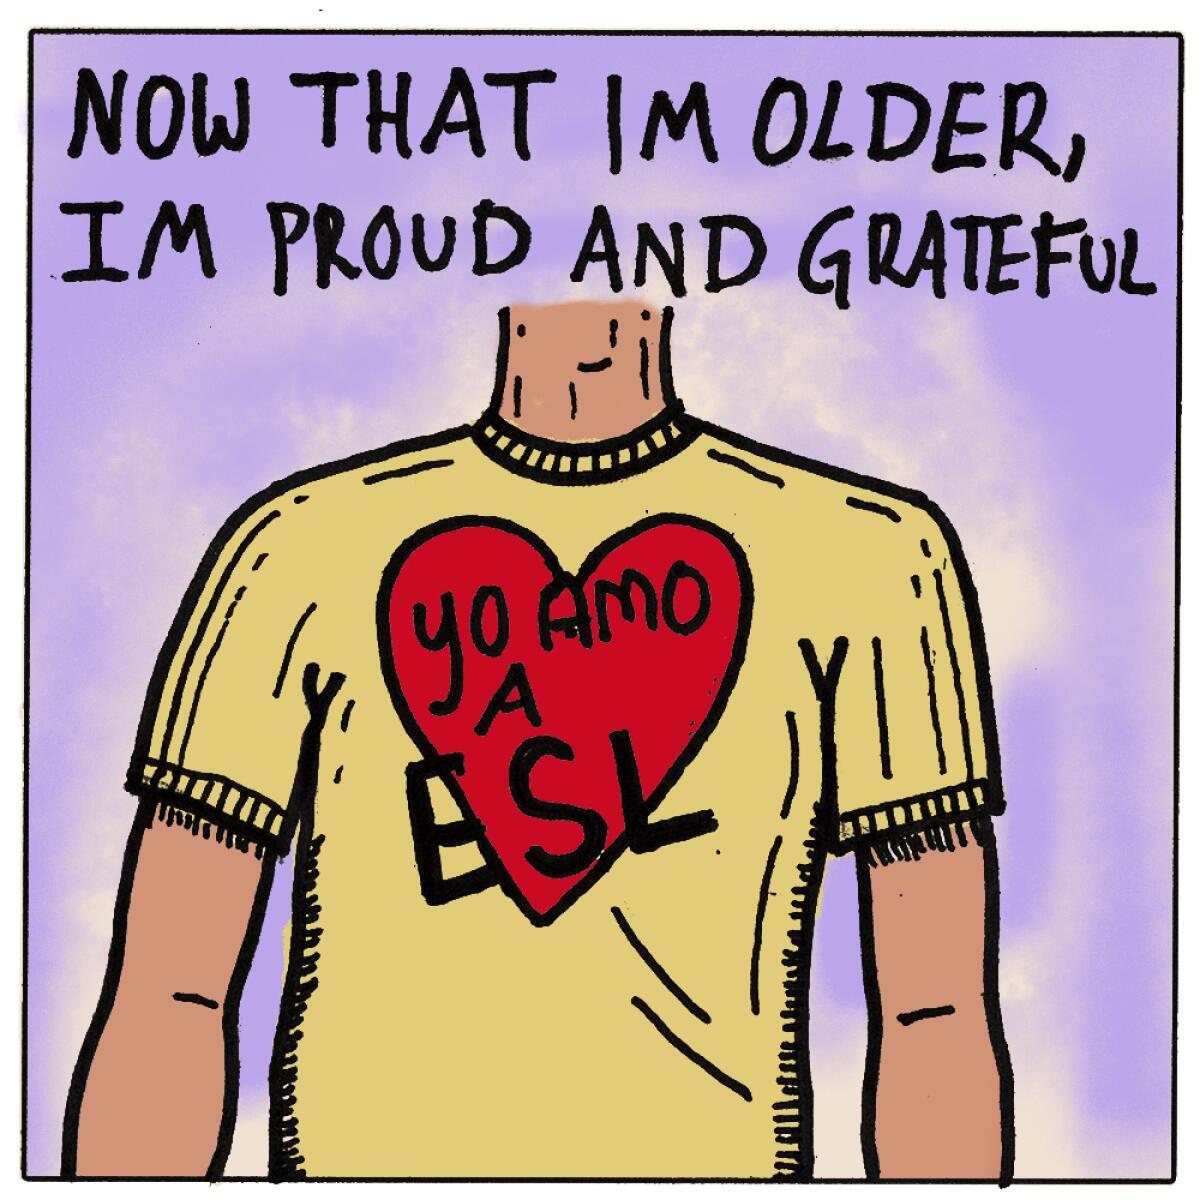 Now that I'm older, I'm proud and grateful 